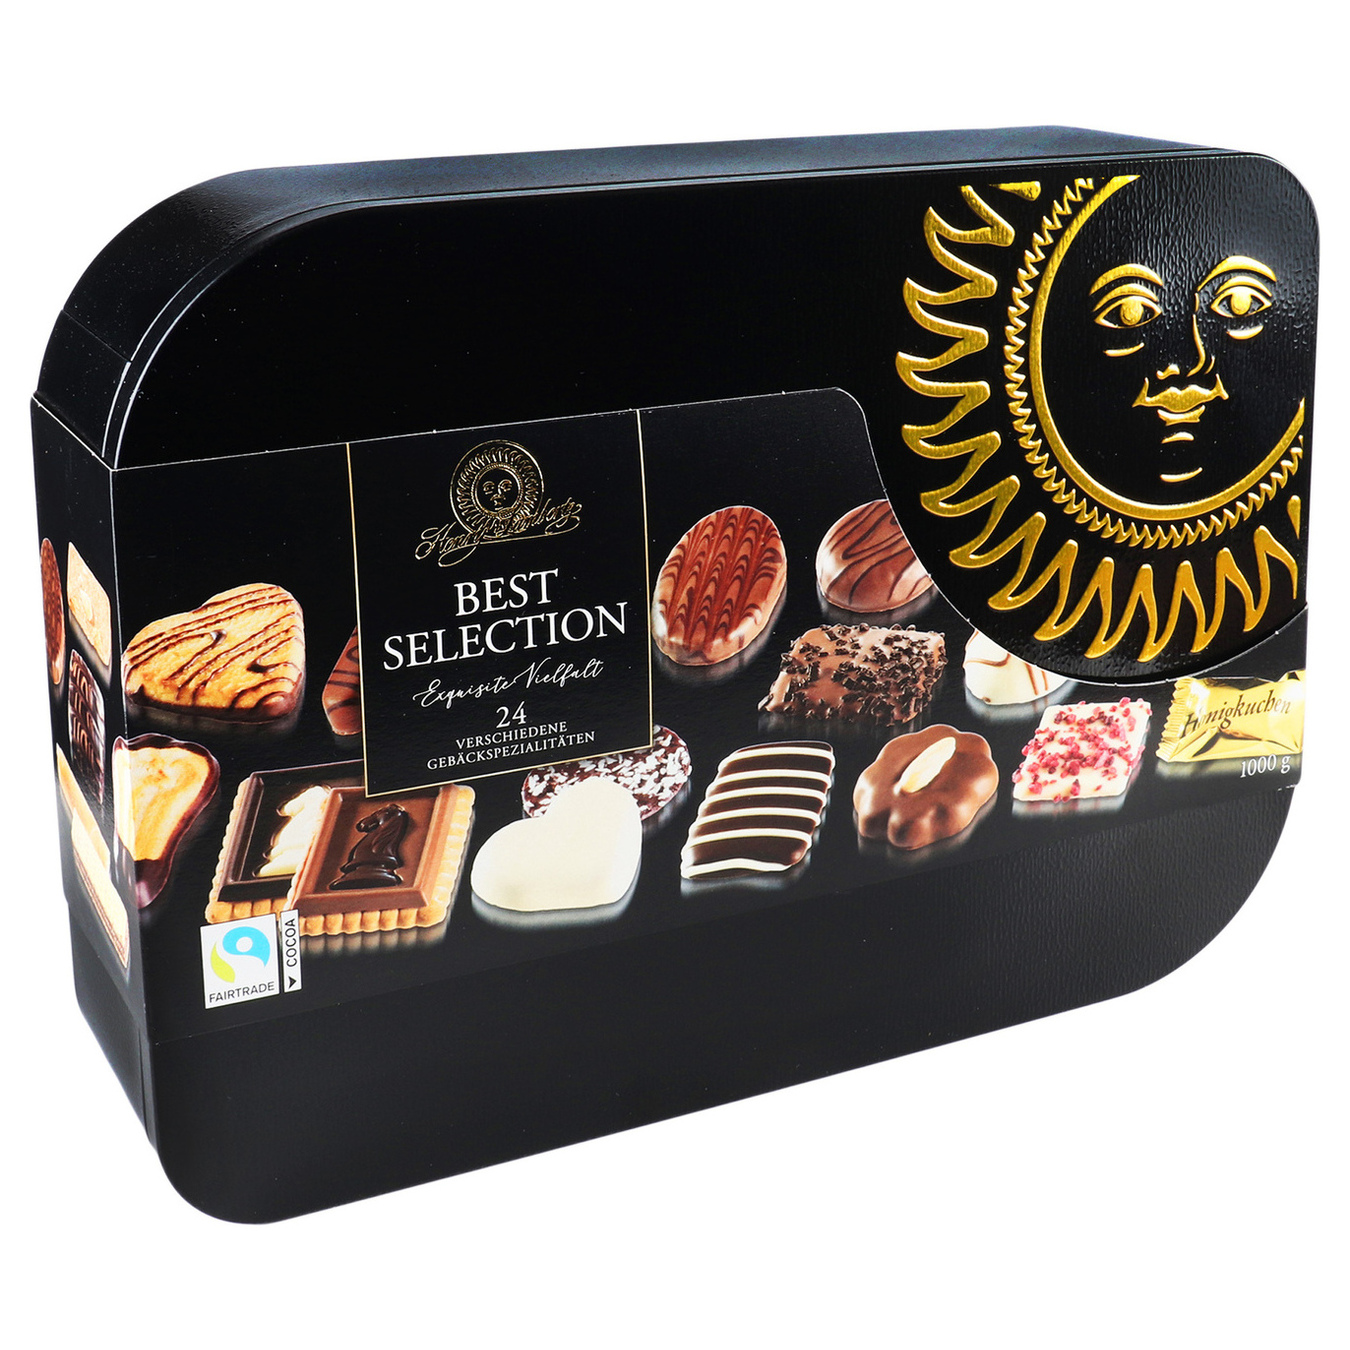 Biscuits set Lambertz Henry The best collection with three types of chocolate 1000g 2